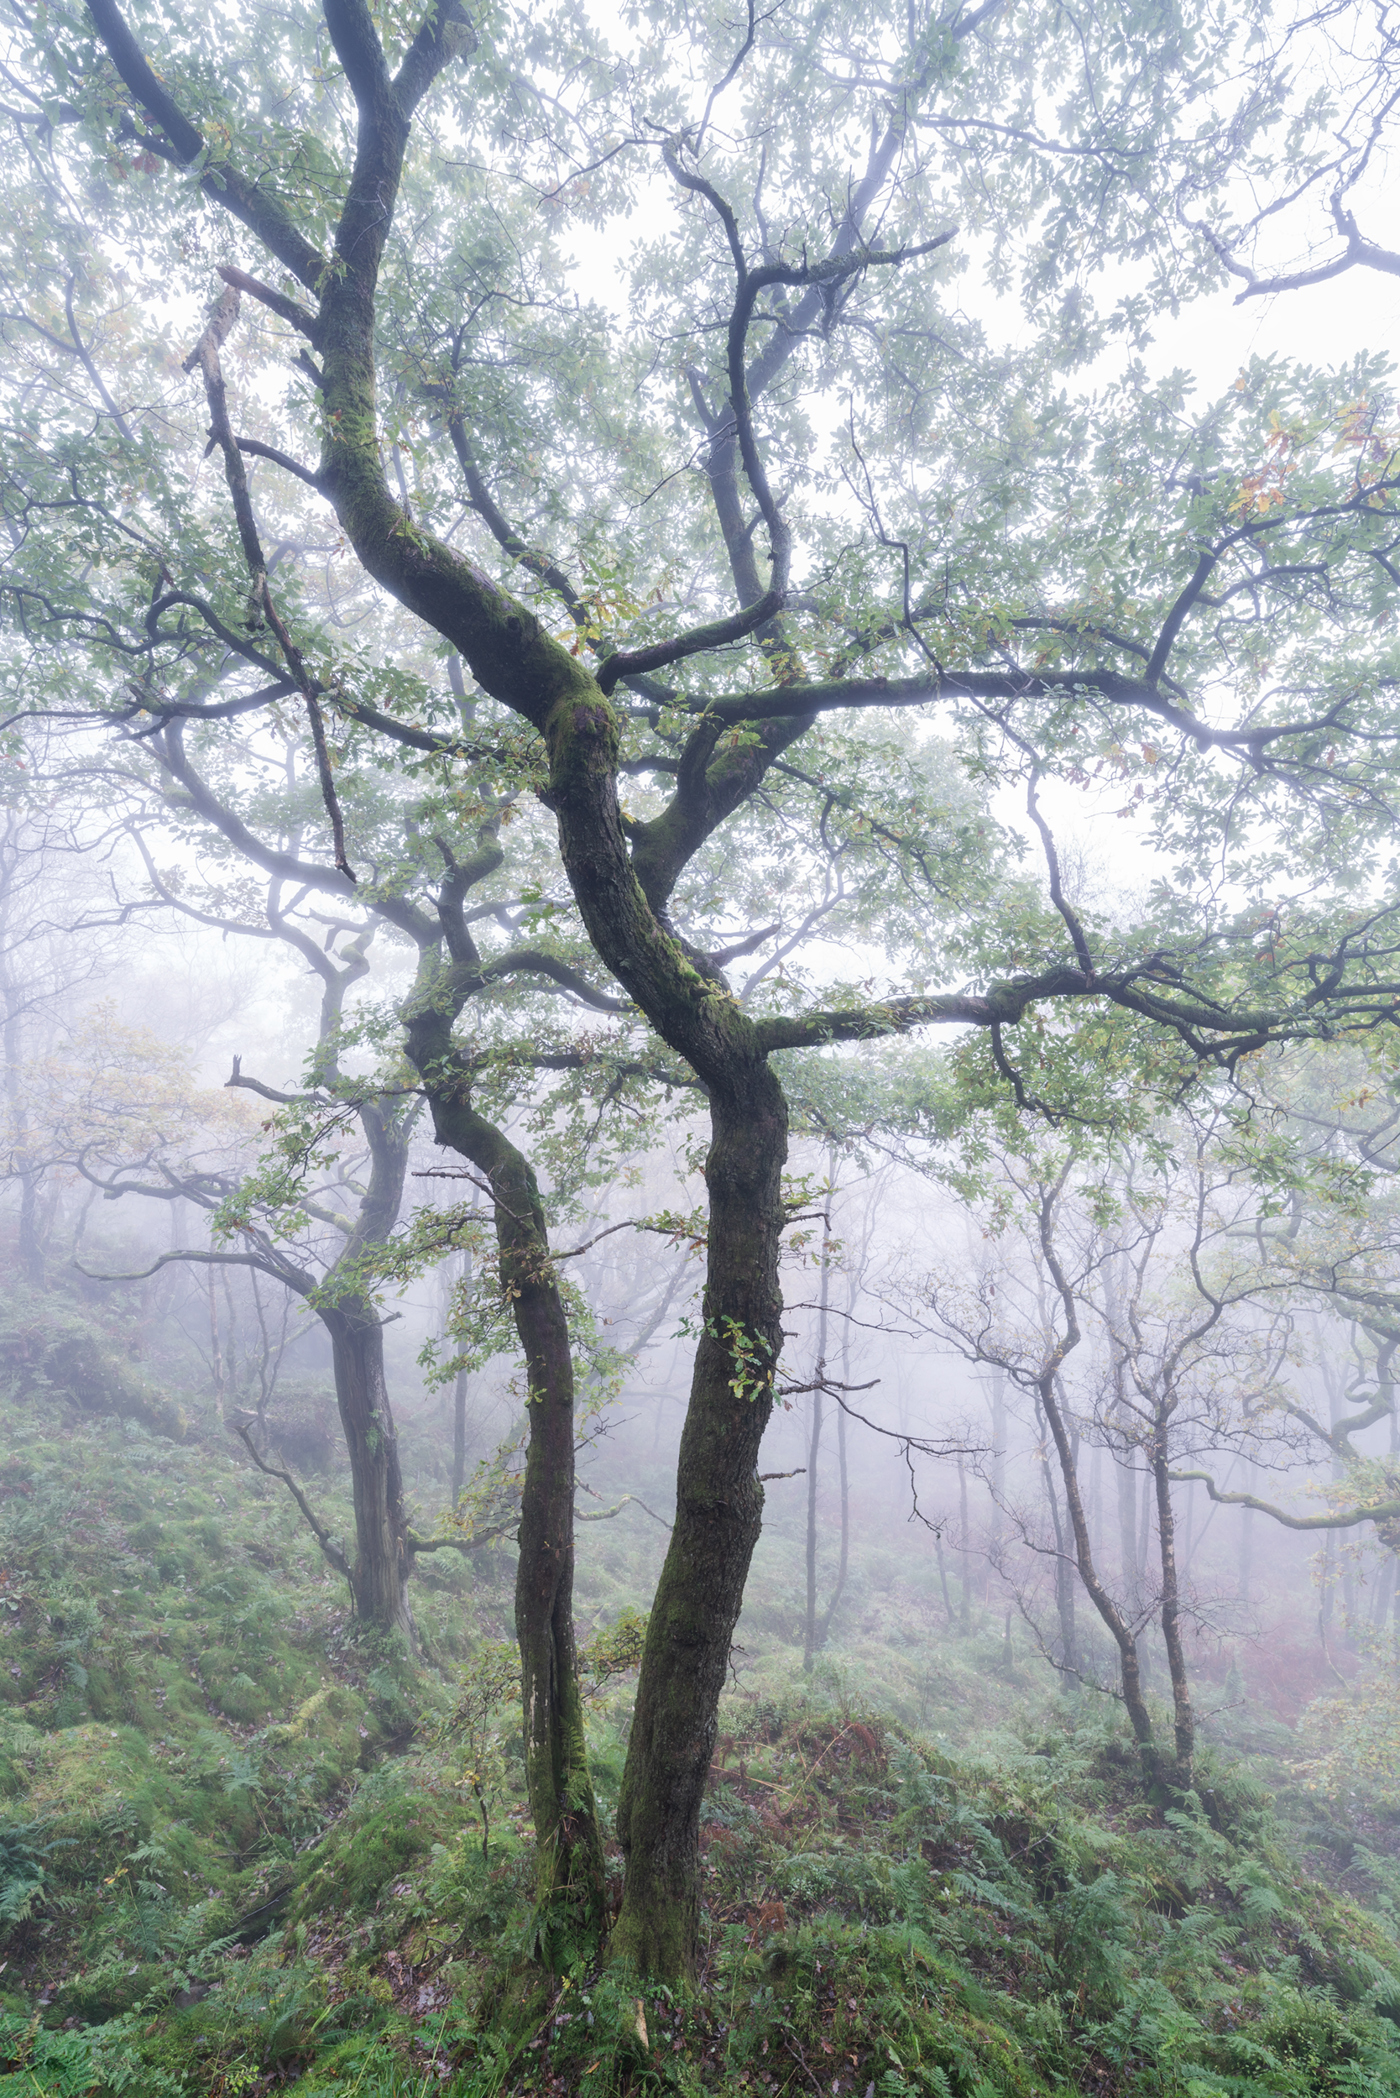 A gnarled tree with moss-covered branches stands prominently amidst a foggy, verdant forest, its leaves lightly diffusing the soft, ethereal light. Gentle gradients of green and the mist's white shroud give the scene an enchanting, almost mystical quality. a group of trees with white flowers